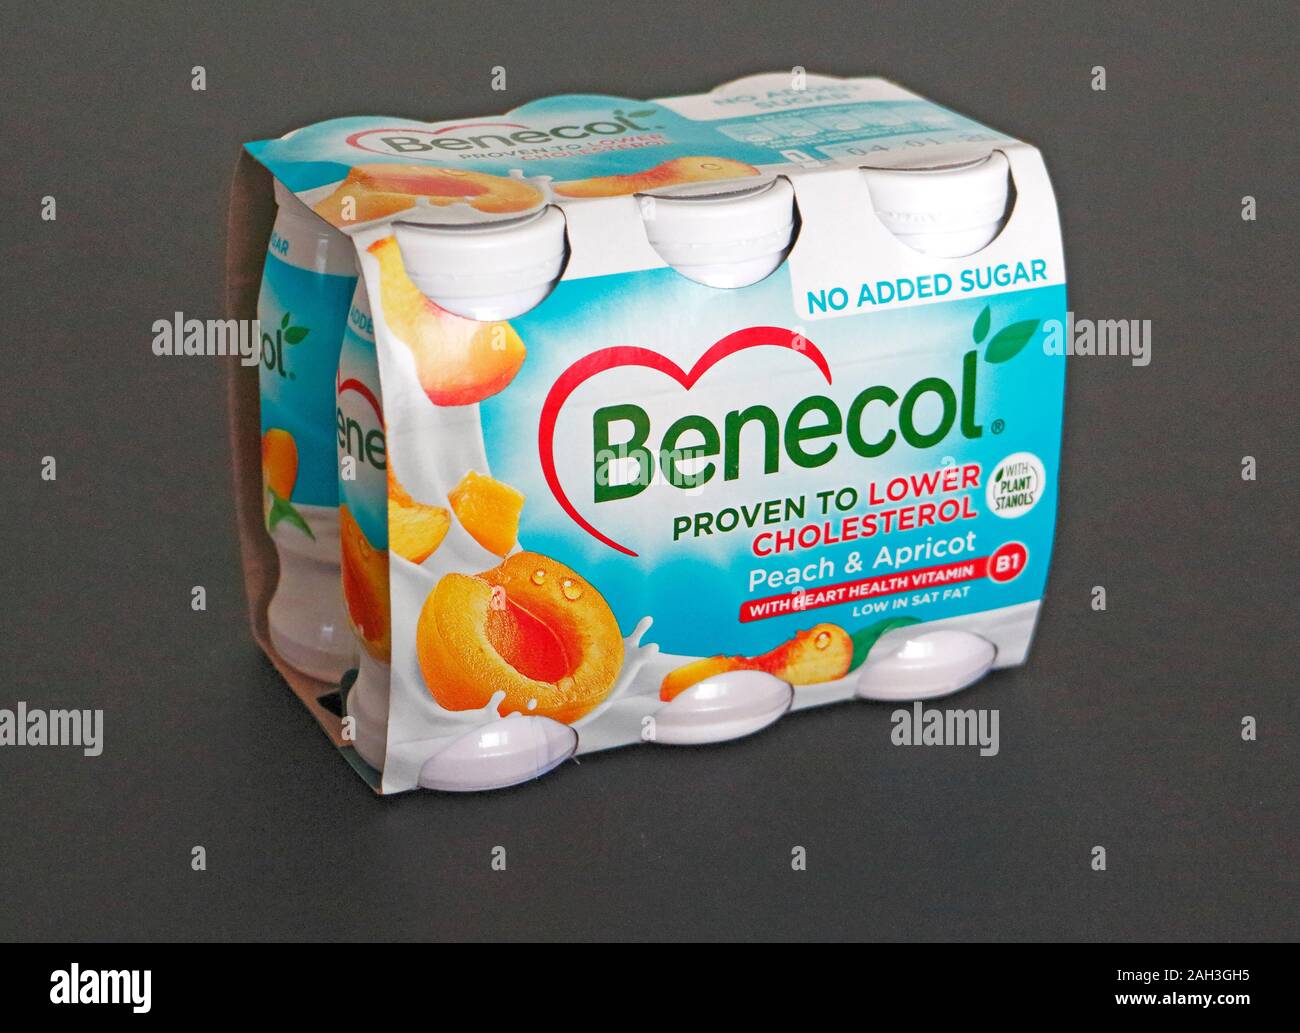 A carton of peach and apricot flavoured Benecol yogurt drinks proven to lower cholesterol against a black background. Stock Photo